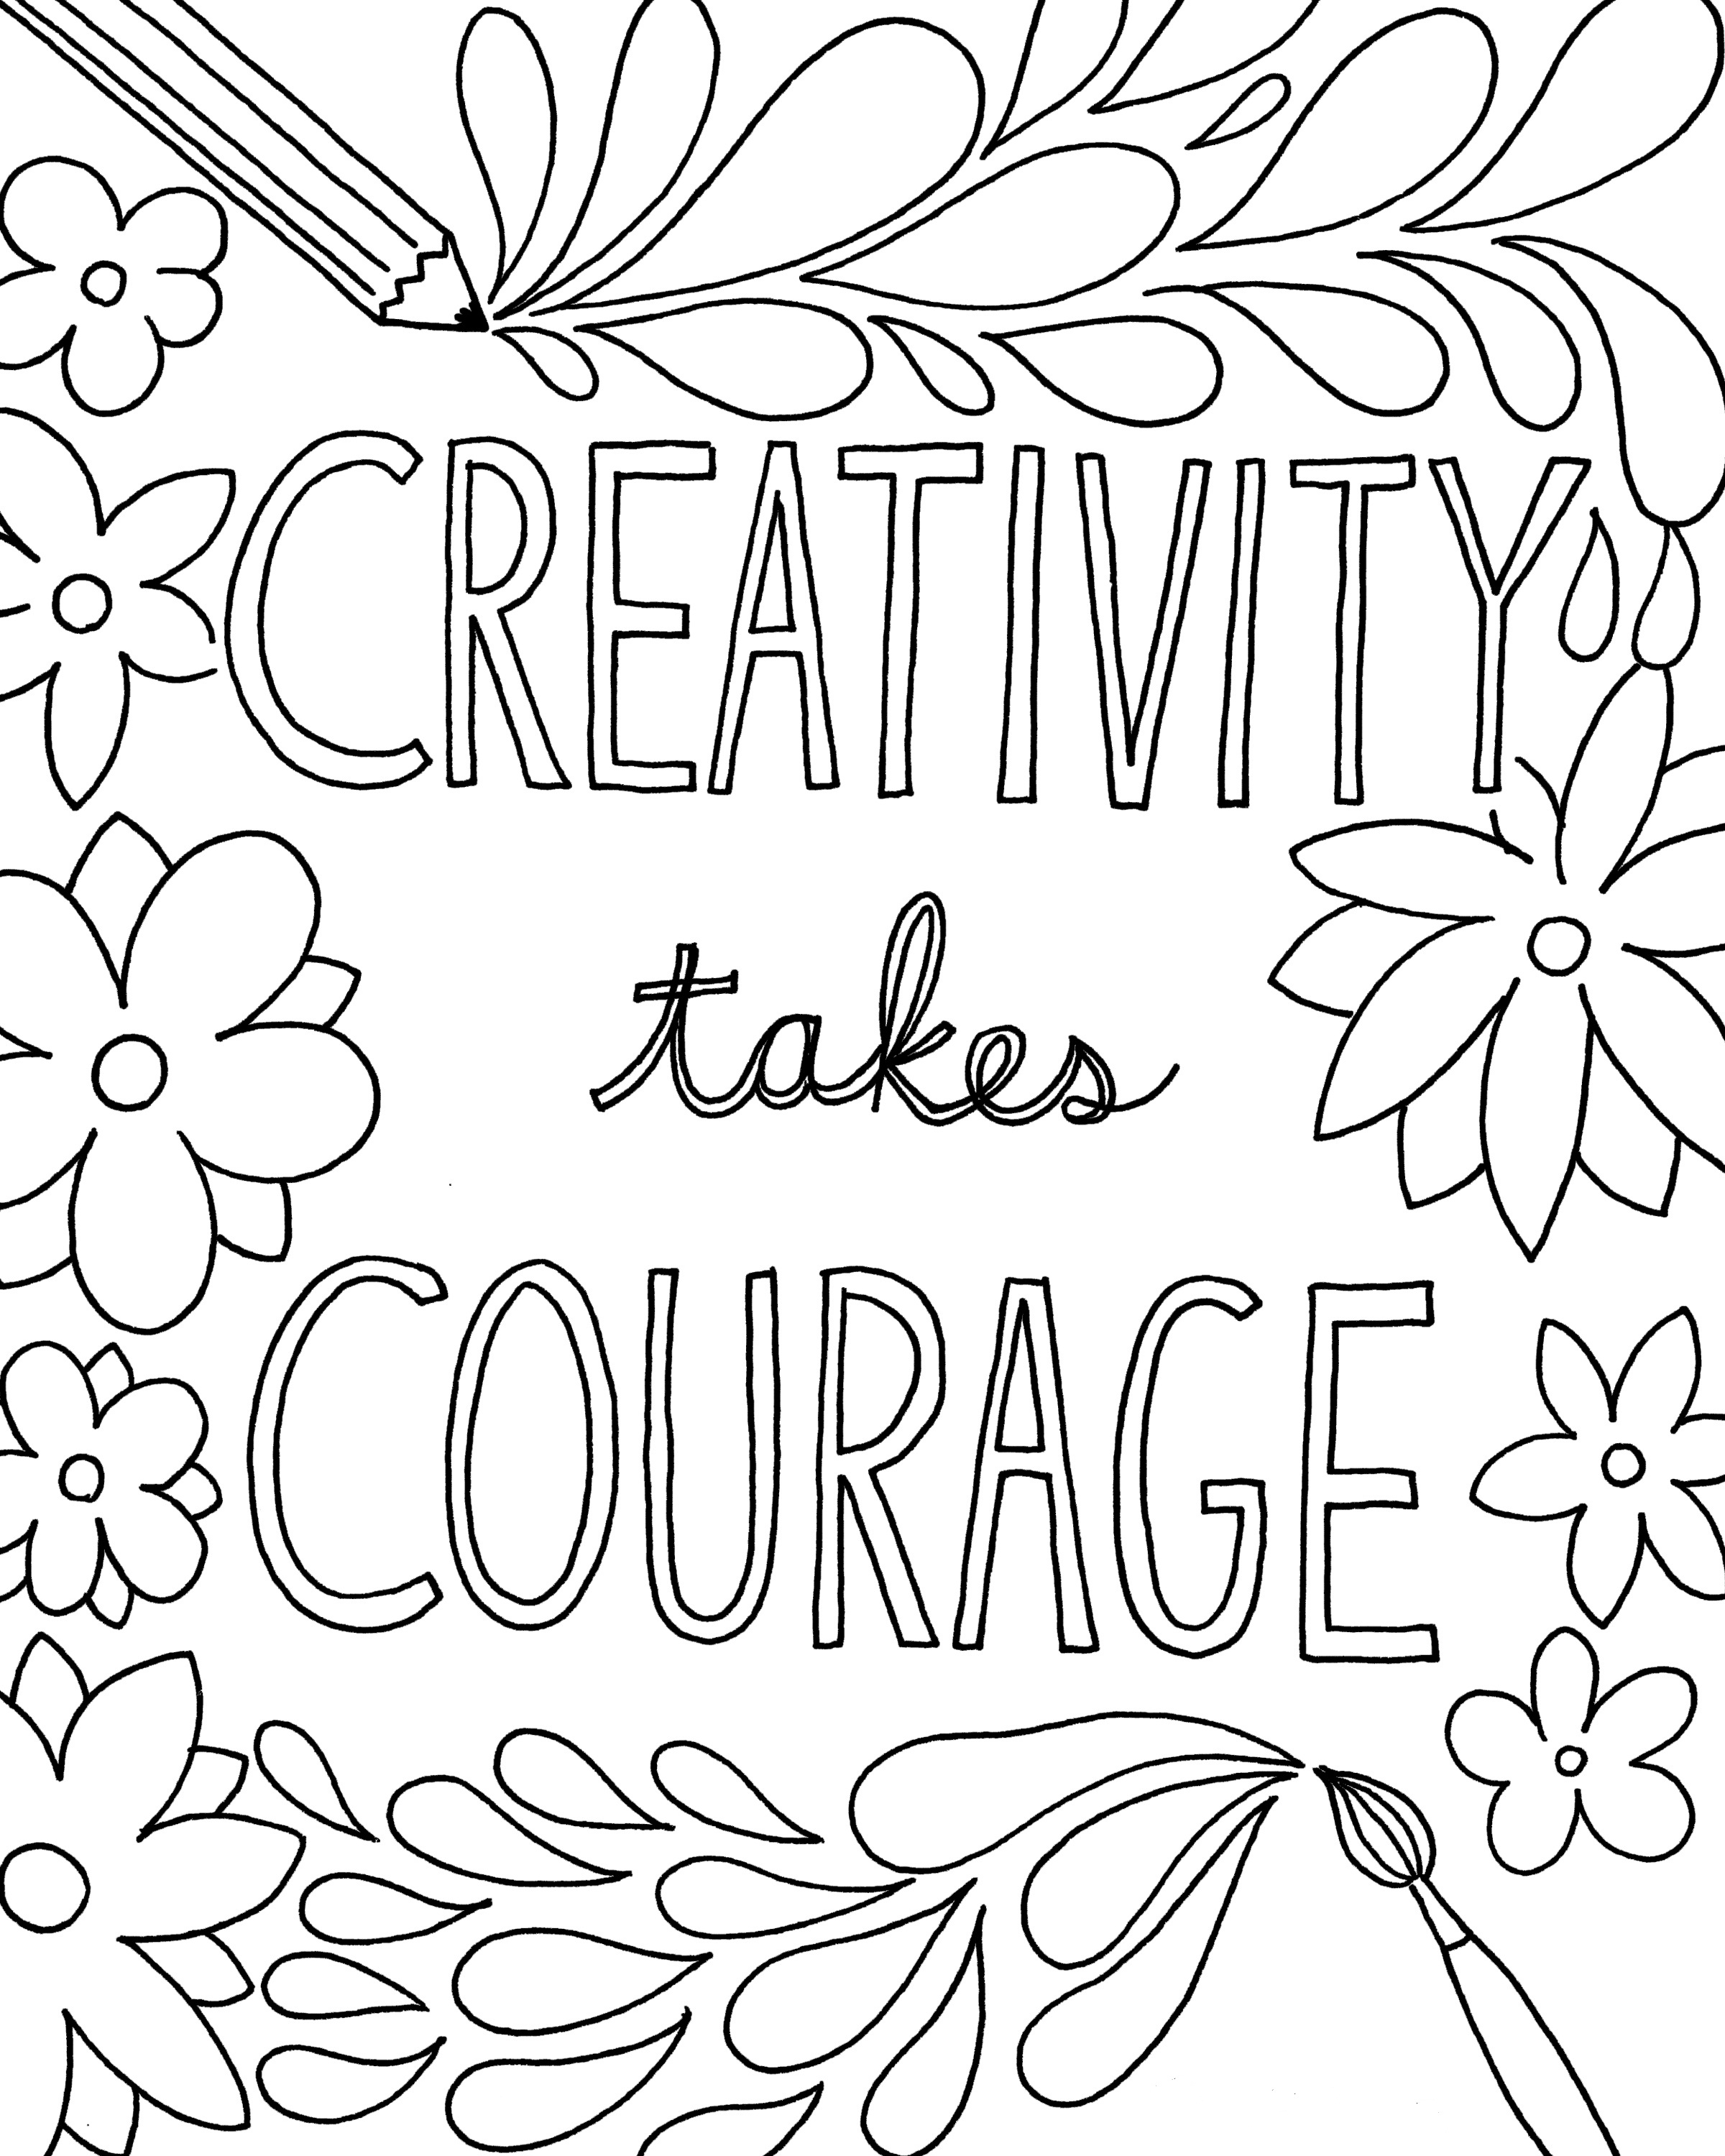 Quote and Sayings Coloring Pages Activity Shelter